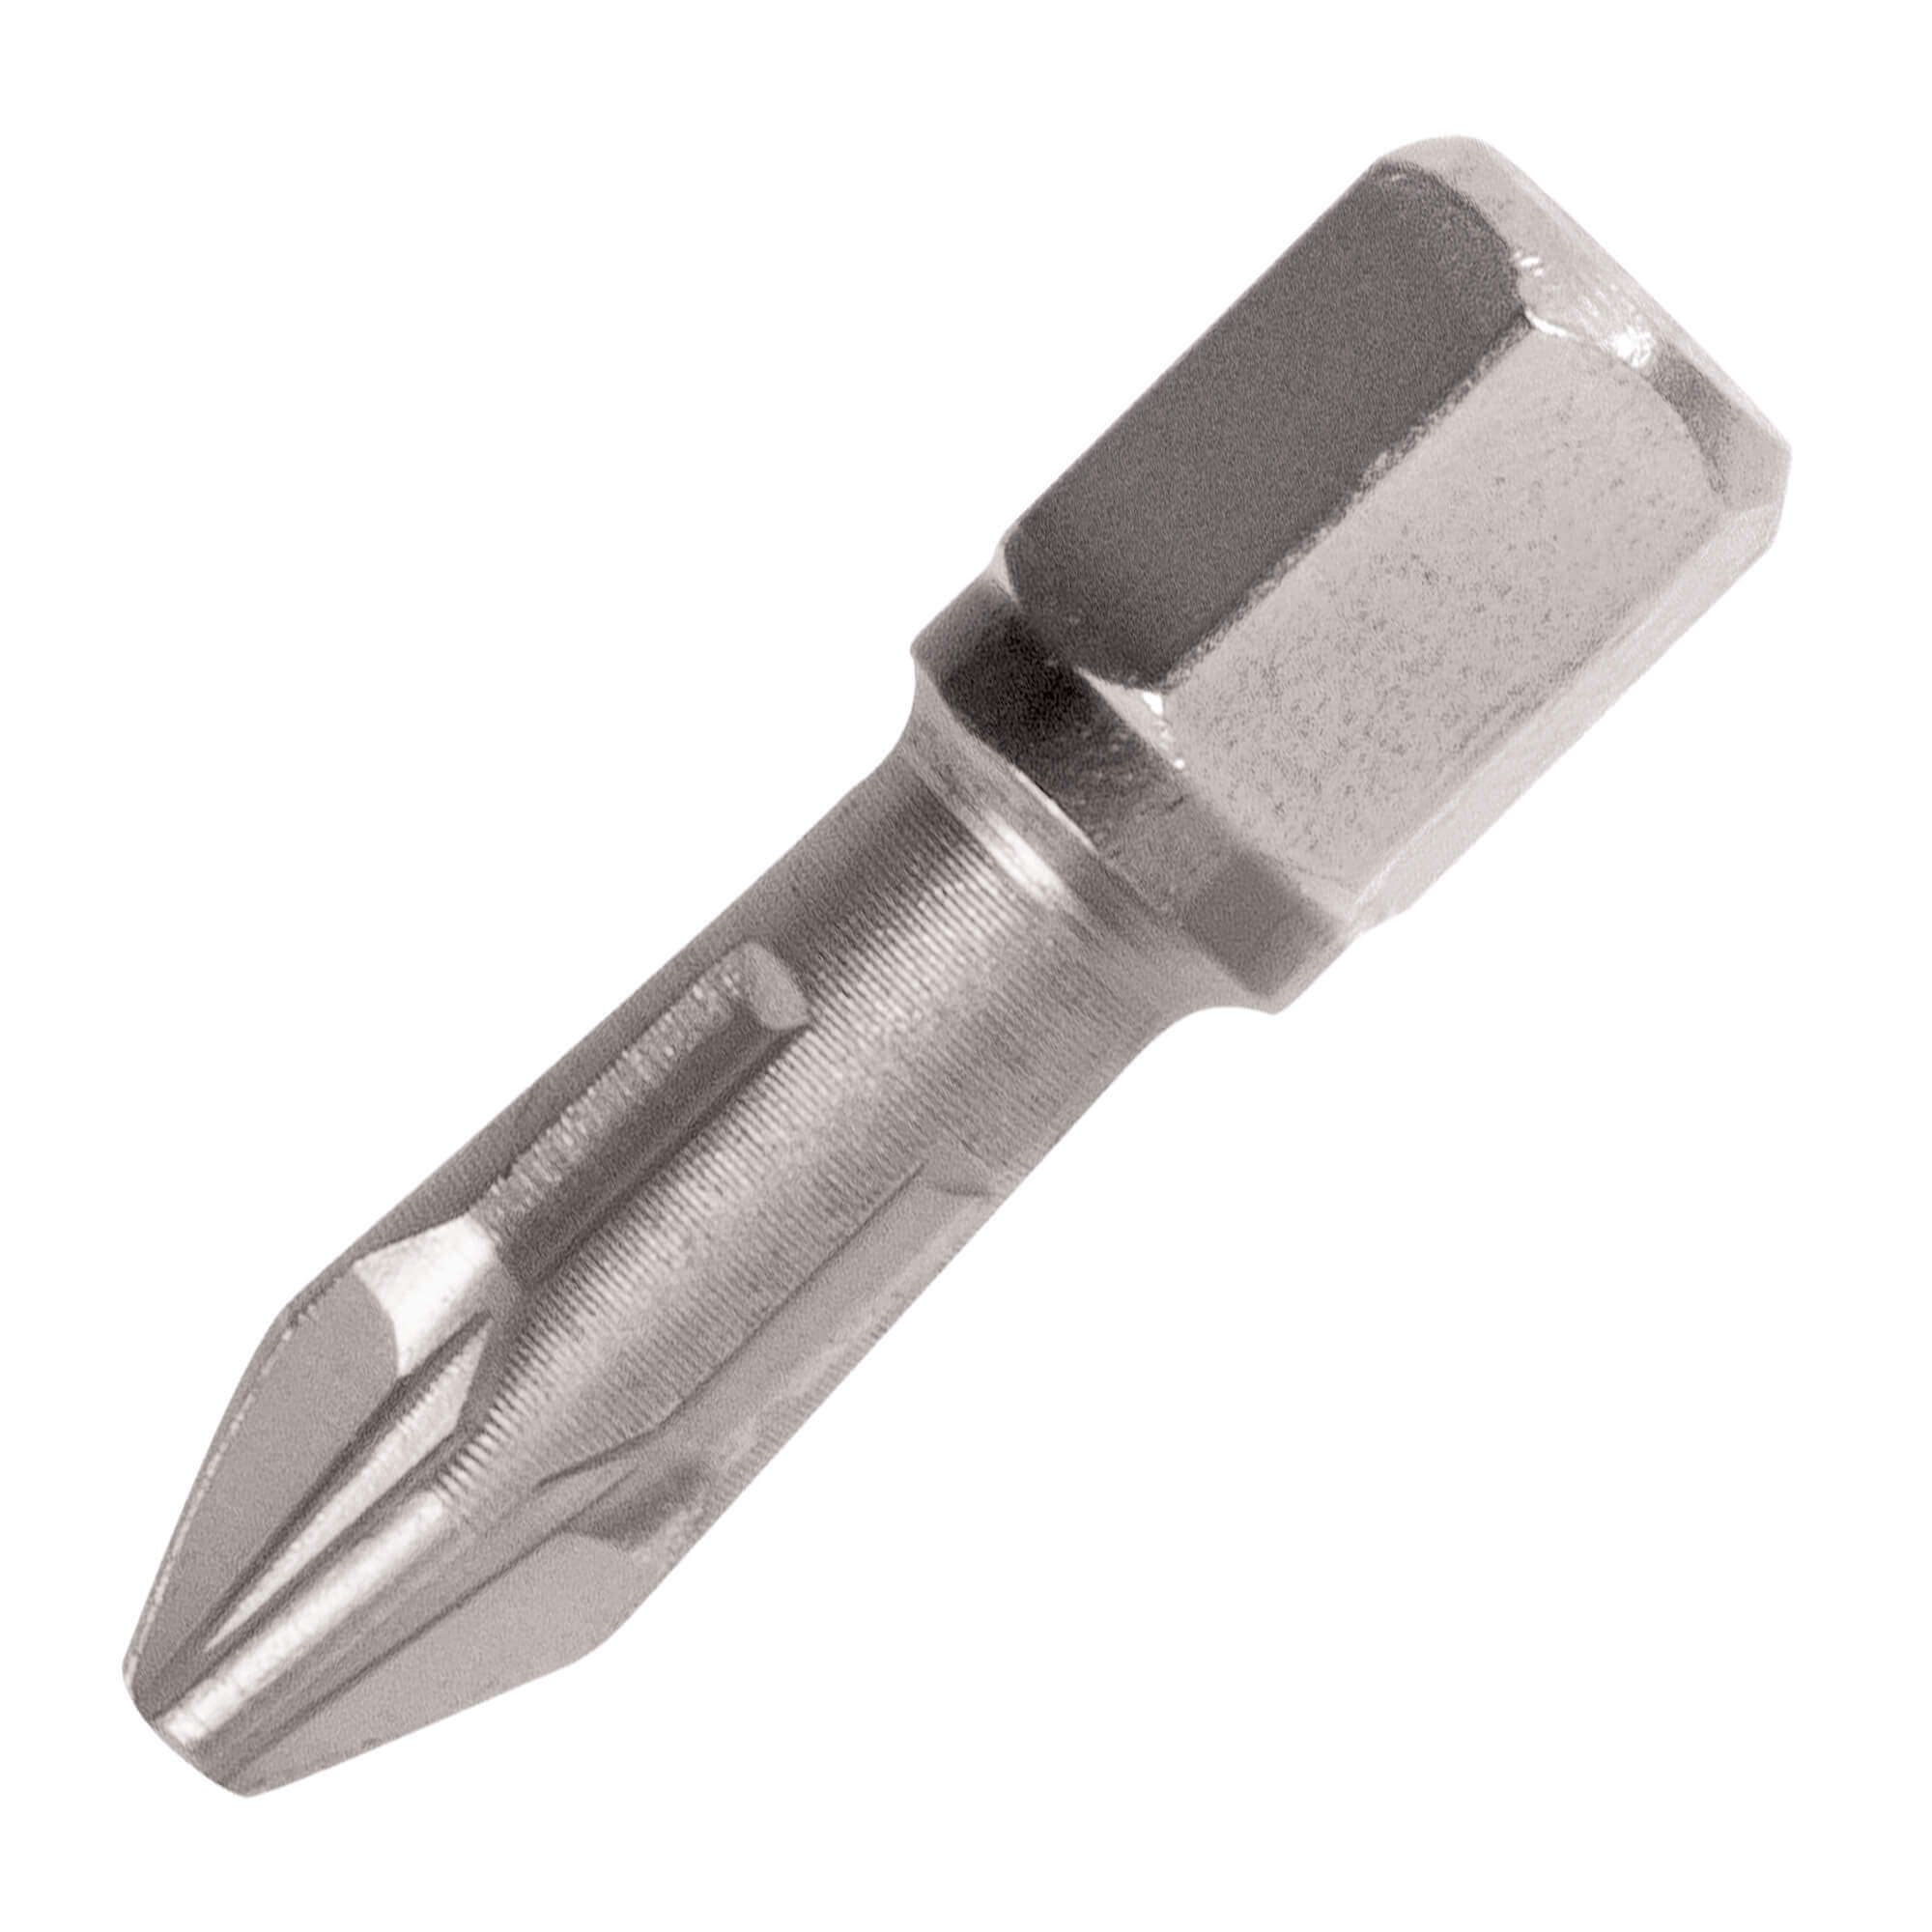 Image of Trend Snappy Tin Coated Pozi Screwdriver Bits PZ2 25mm Pack of 10